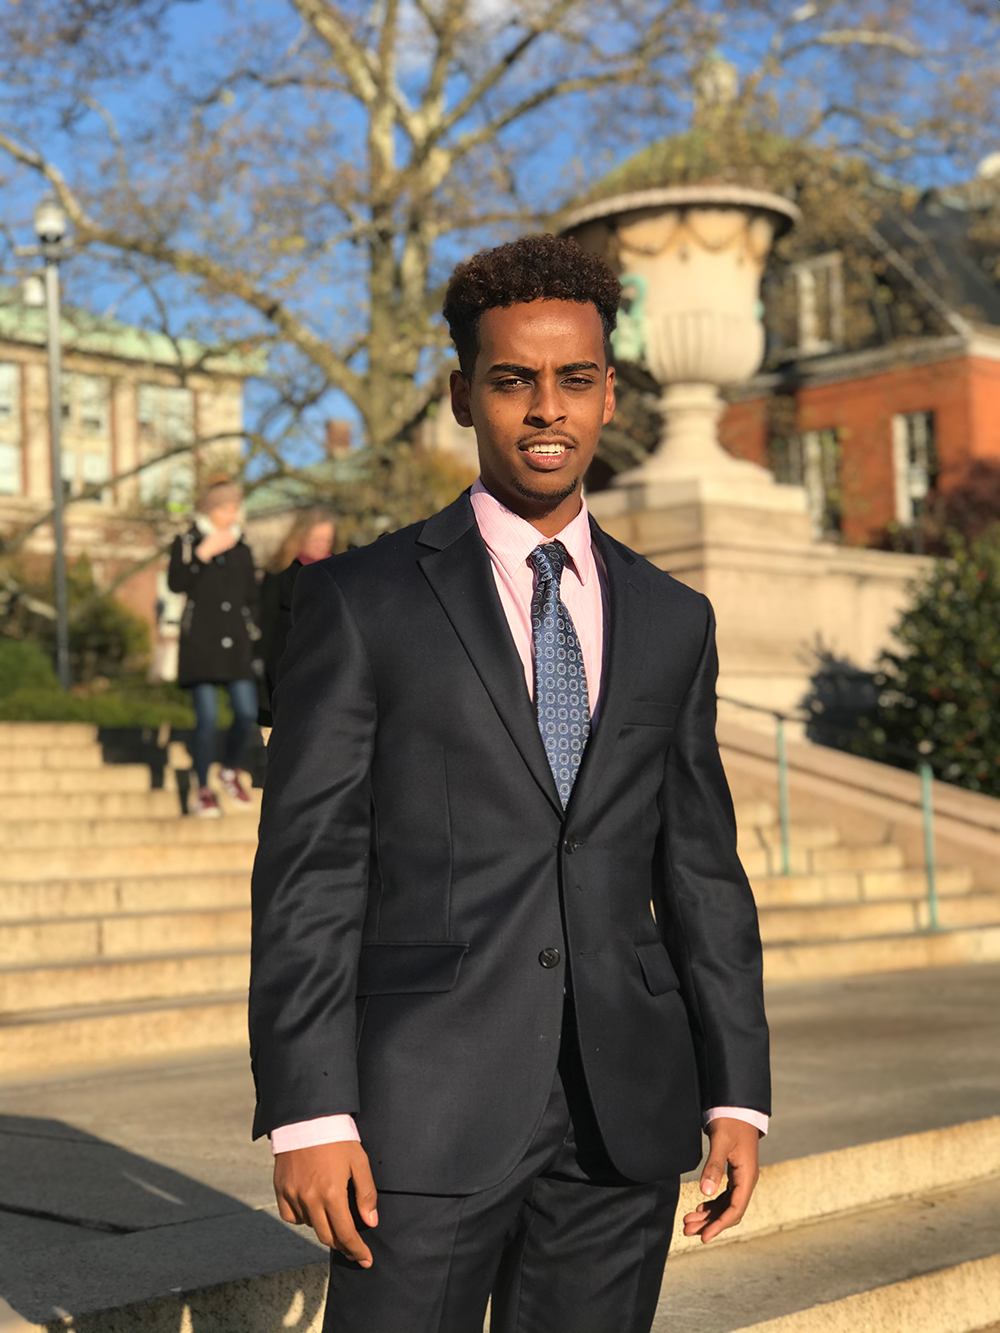 Matthews Tessema posing in a suit outdoors. Behind him are stairs, other people walking by, and buildings.